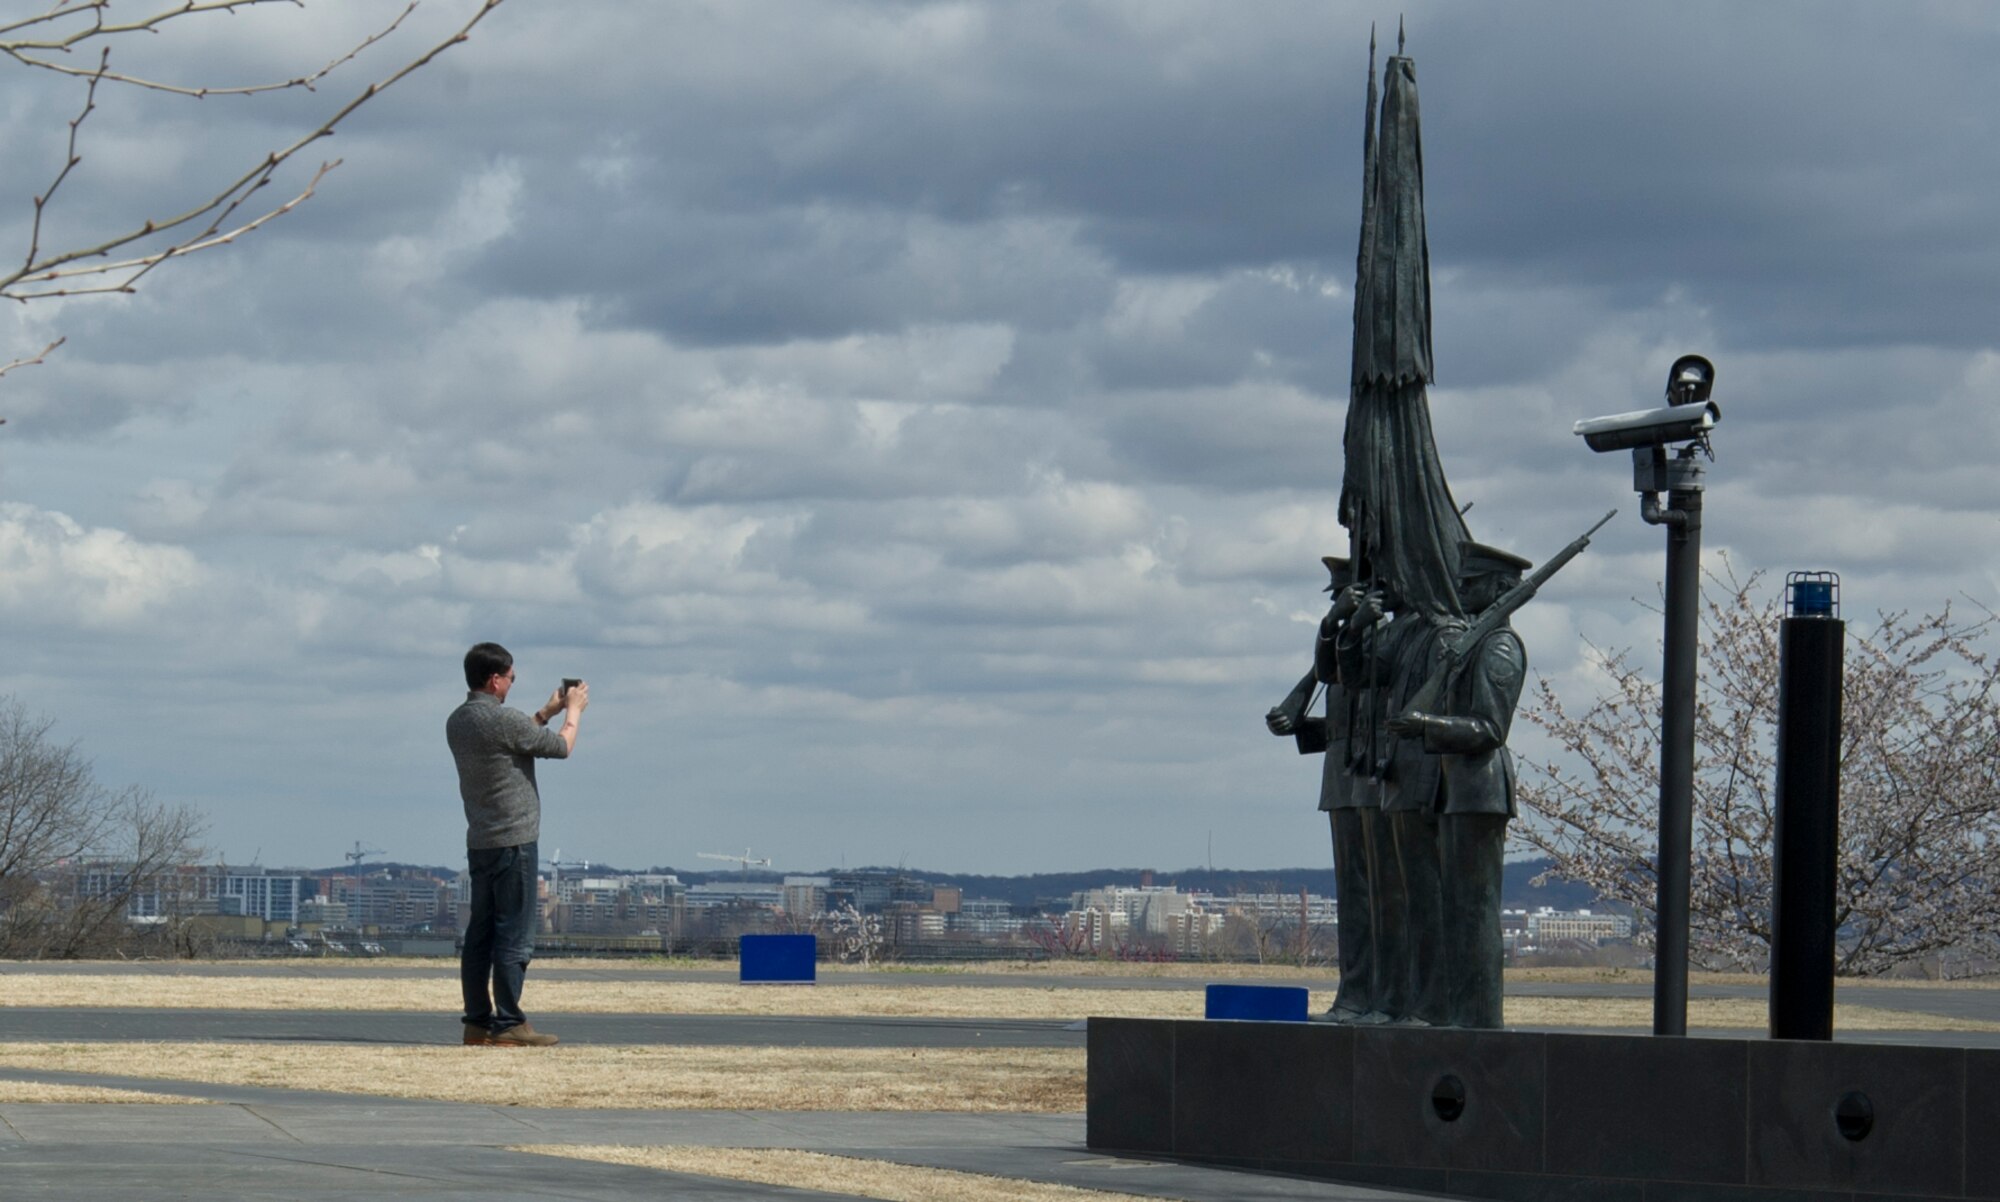 A visitor to the U.S. Air Force Memorial photographs statues that portray Airmen from The U.S. Air Force Honor Guard March 28, 2017 in Arlington, Virginia. The Air Force Memorial, located at 1 Air Force Memorial Way, is free and open to the public. (U.S. Air Force photo by Staff Sgt. Joe Yanik)